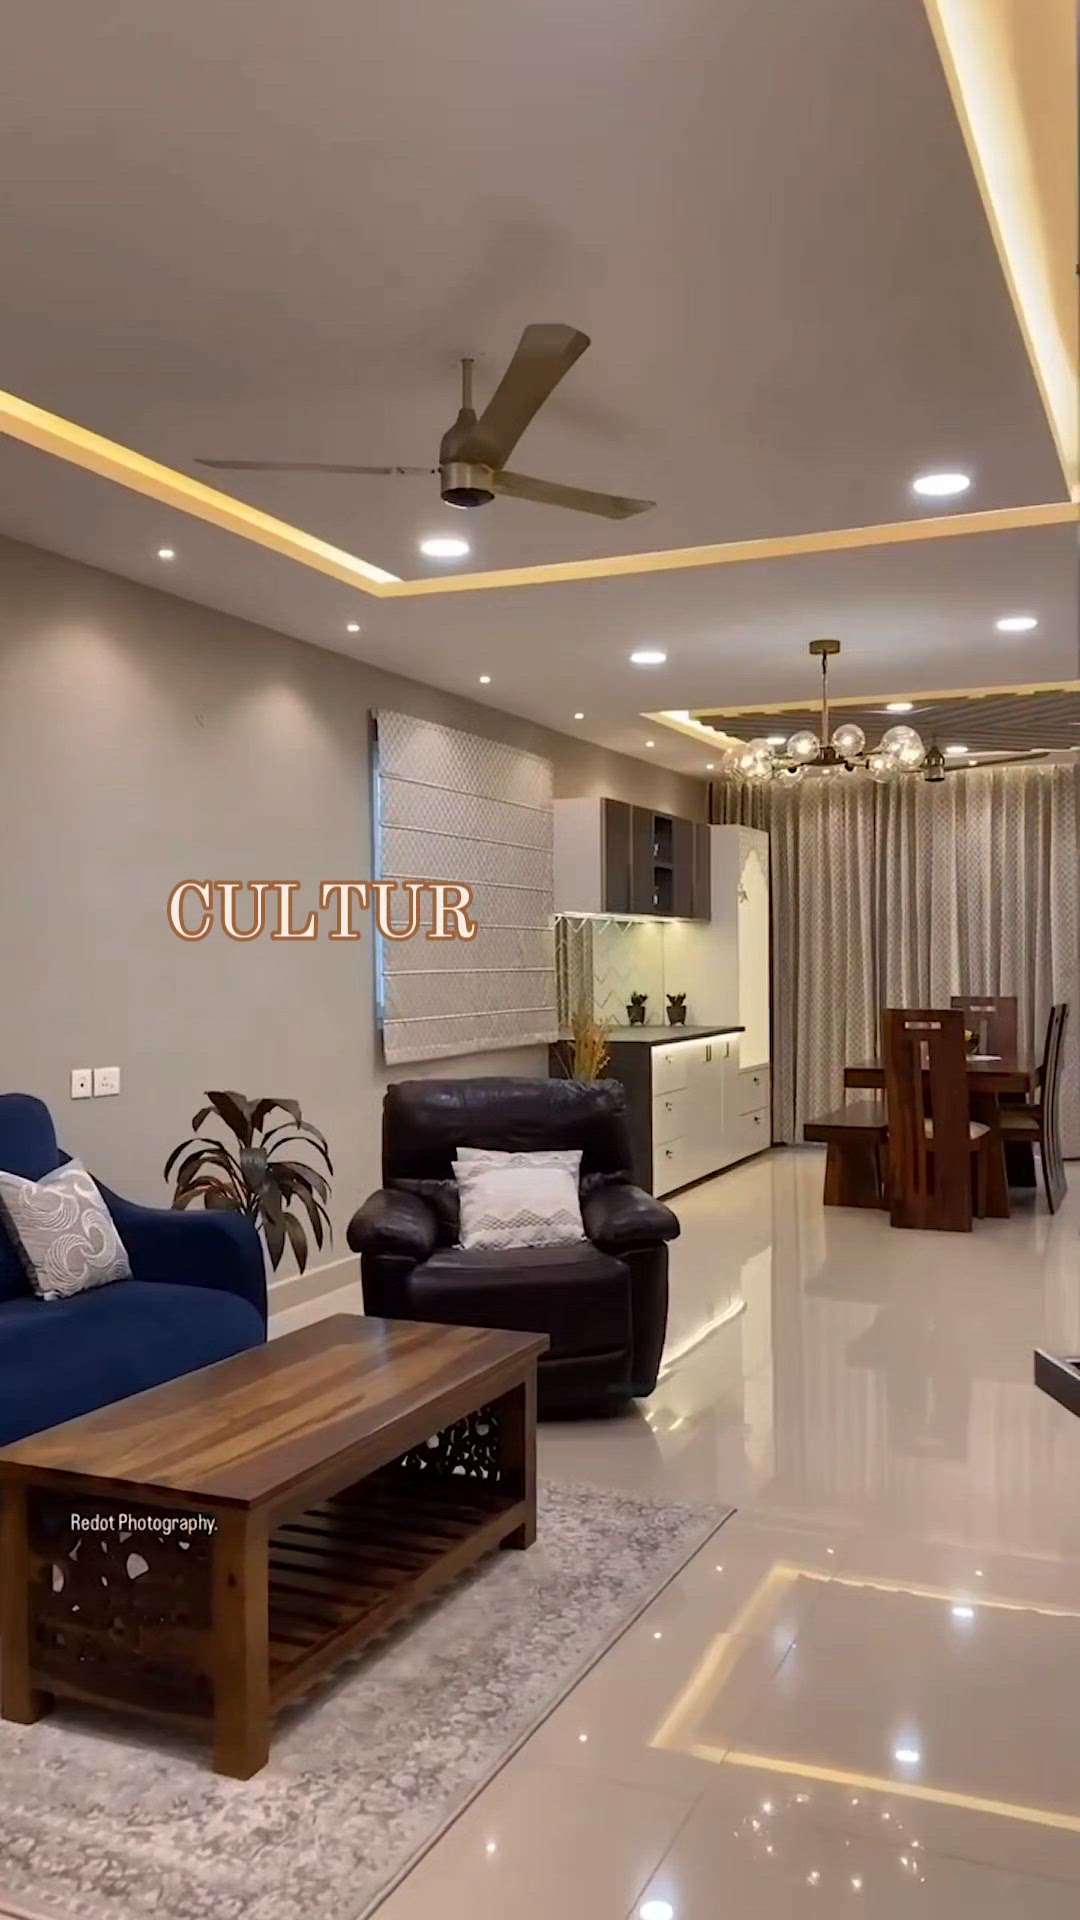 Find here the best home interiors and get design your Entire Home Including your ✓Livingroom ✓Bedroom ✓Kitchen ✓Bathroom and everything.
.
.
.
contact us  9953725277/ 9654191110
Email I'd: cultureinterior2017@gmail.com
Website: www.cultureinterior.in

Please do like ,share & subscribe our you tube channel https://youtube.com/channel/UC9Hm9090aOlJOcszdAb6-PQ
.
.
.
#interiors #interiordesign #interior #design #homedecor #decor #architecture #home #interiordesigner #homedesign #interiorstyling #furniture #interiordecor #decoration #art #luxury #designer #inspiration #interiordecorating #style #homesweethome #livingroom #interiorinspo #furnituredesign #handmade #homestyle #interiorstyle #interiorinspirationsbydarcy